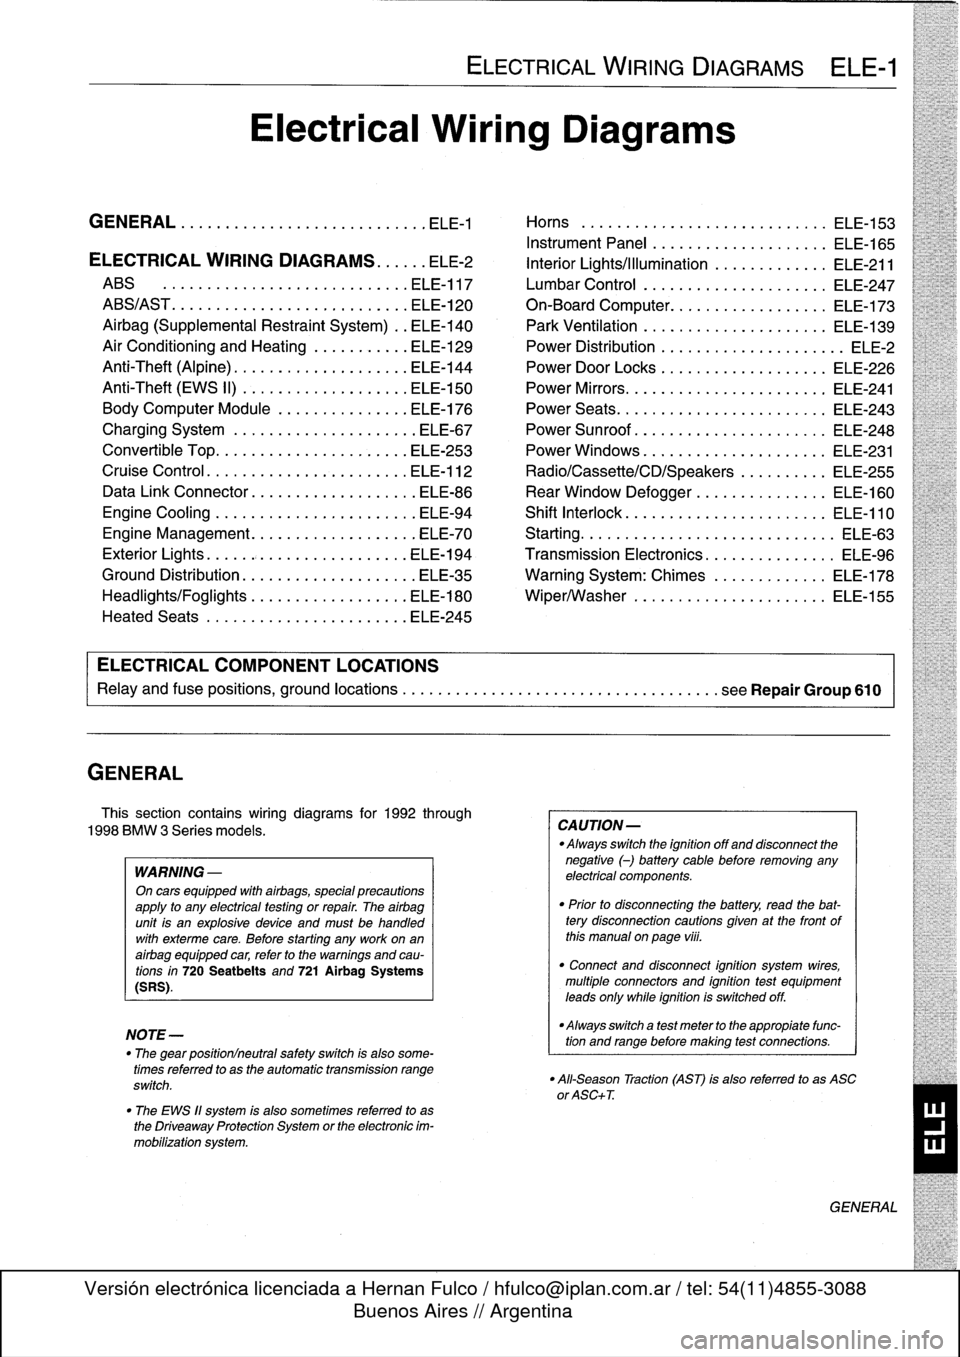 BMW 318i 1997 E36 Owners Guide 
GENERAL

This
section
contains
wiring
diagrams
for
1992
through

1998
BMW
3
Series
models
.

WARNING
-

On
cars
equipped
with
airbags,
special
precautions
apply
to
any
electrical
testing
or
repair
.
